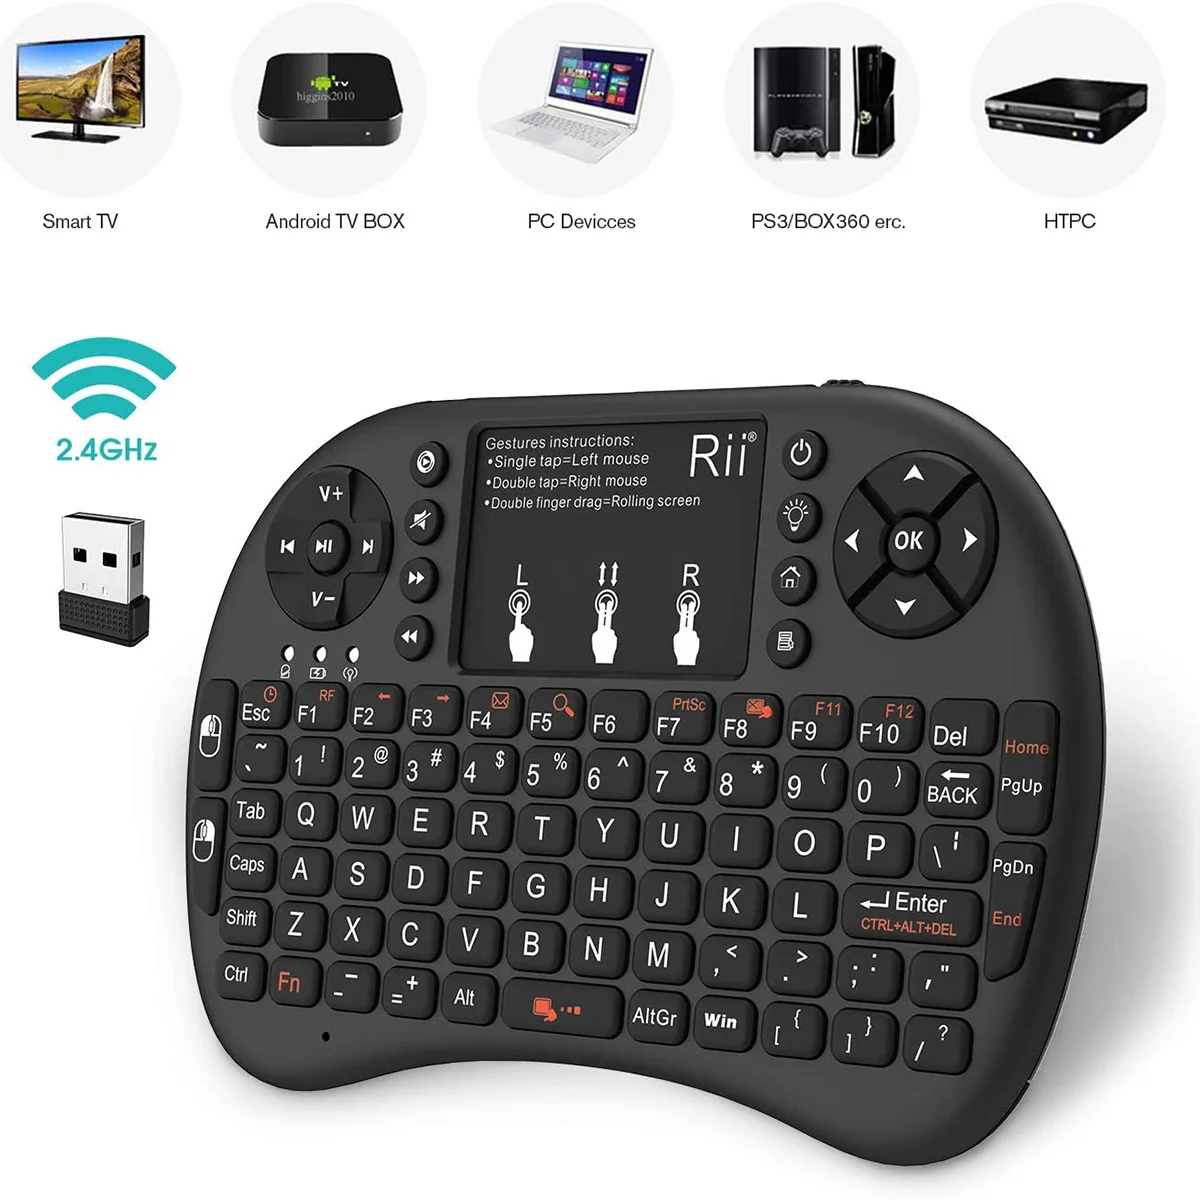 2.4ghz Wireless Keyboard With Touchpad For Android Tv Box,pc,laptop,smart Tv,htpc